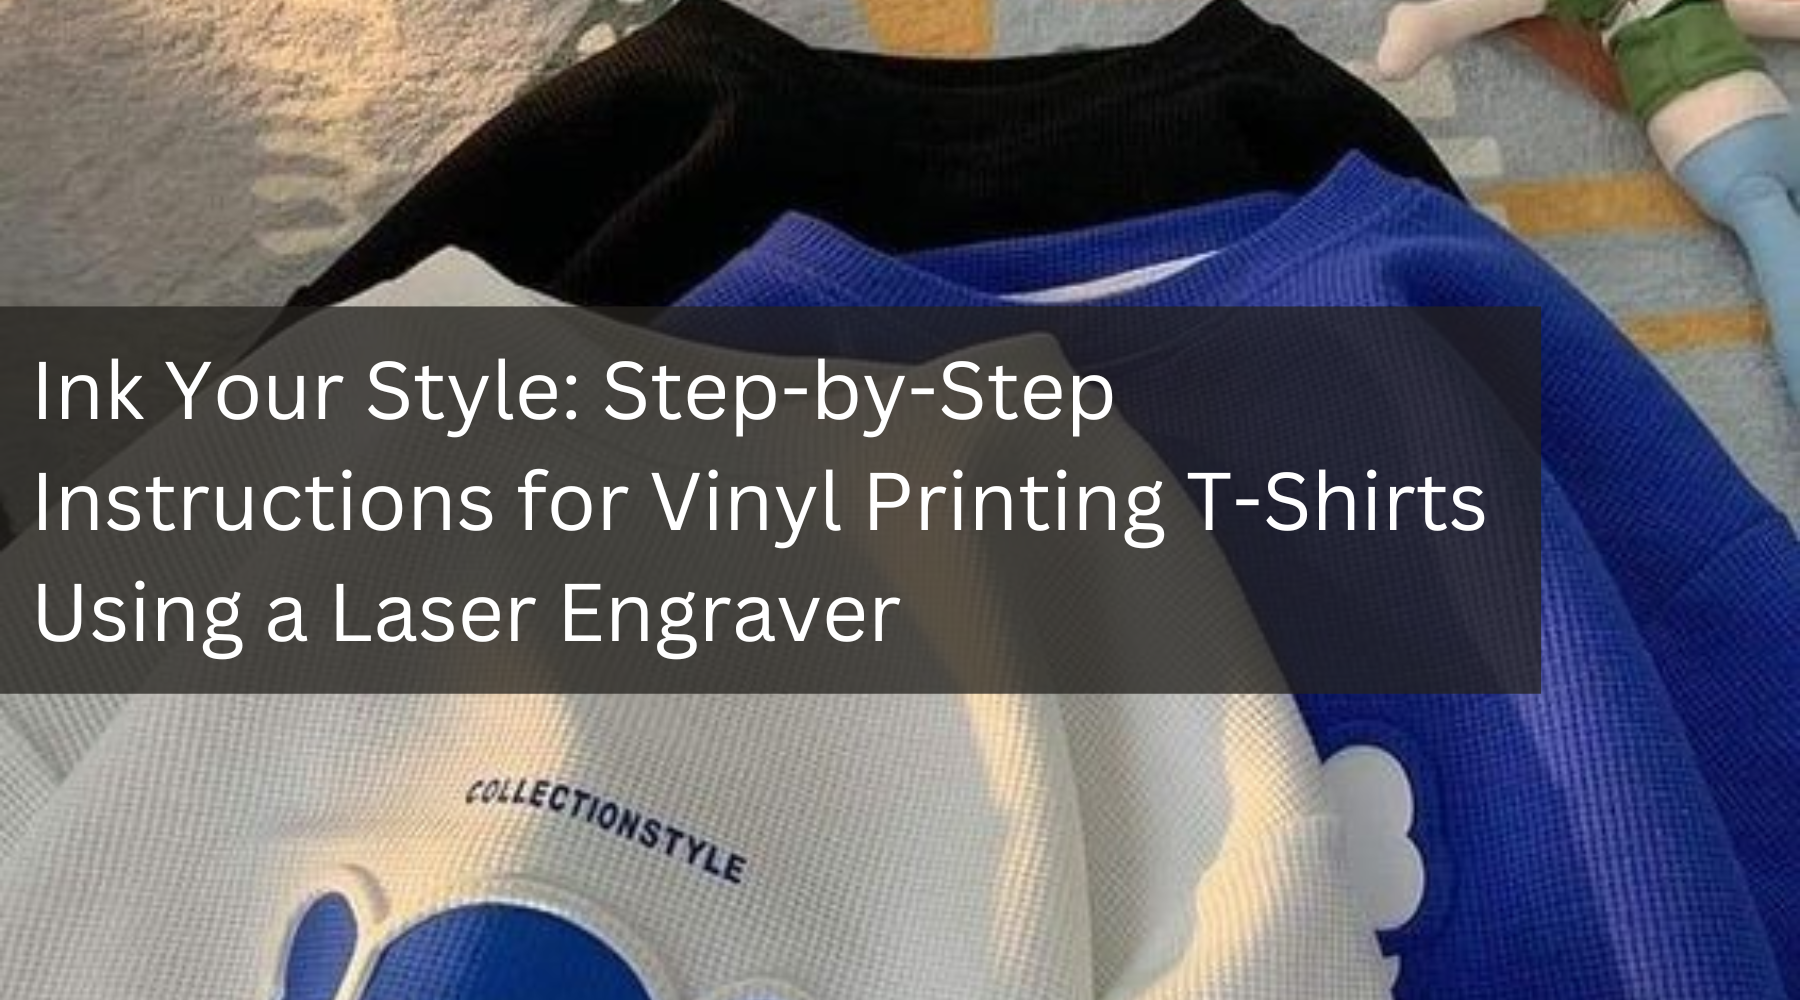 Ink Your Style: Step-by-Step Instructions for Vinyl Printing T-Shirts Using a Laser Engraver